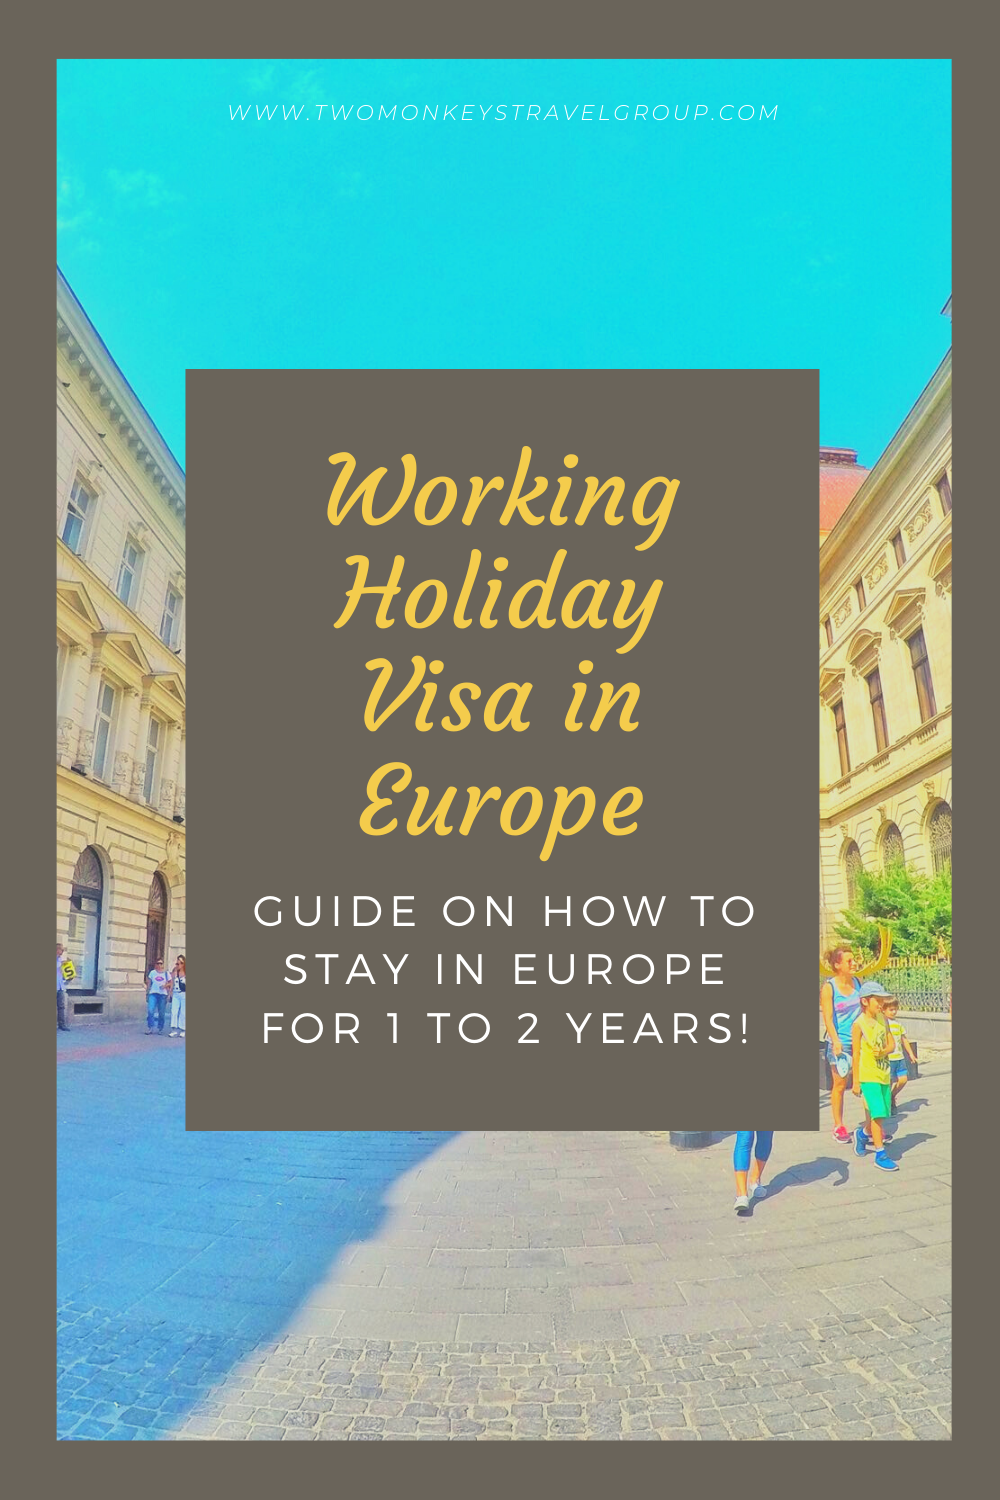 Guide to Working Holiday Visa in Europe How To Stay in Europe for 1 to 2 years!